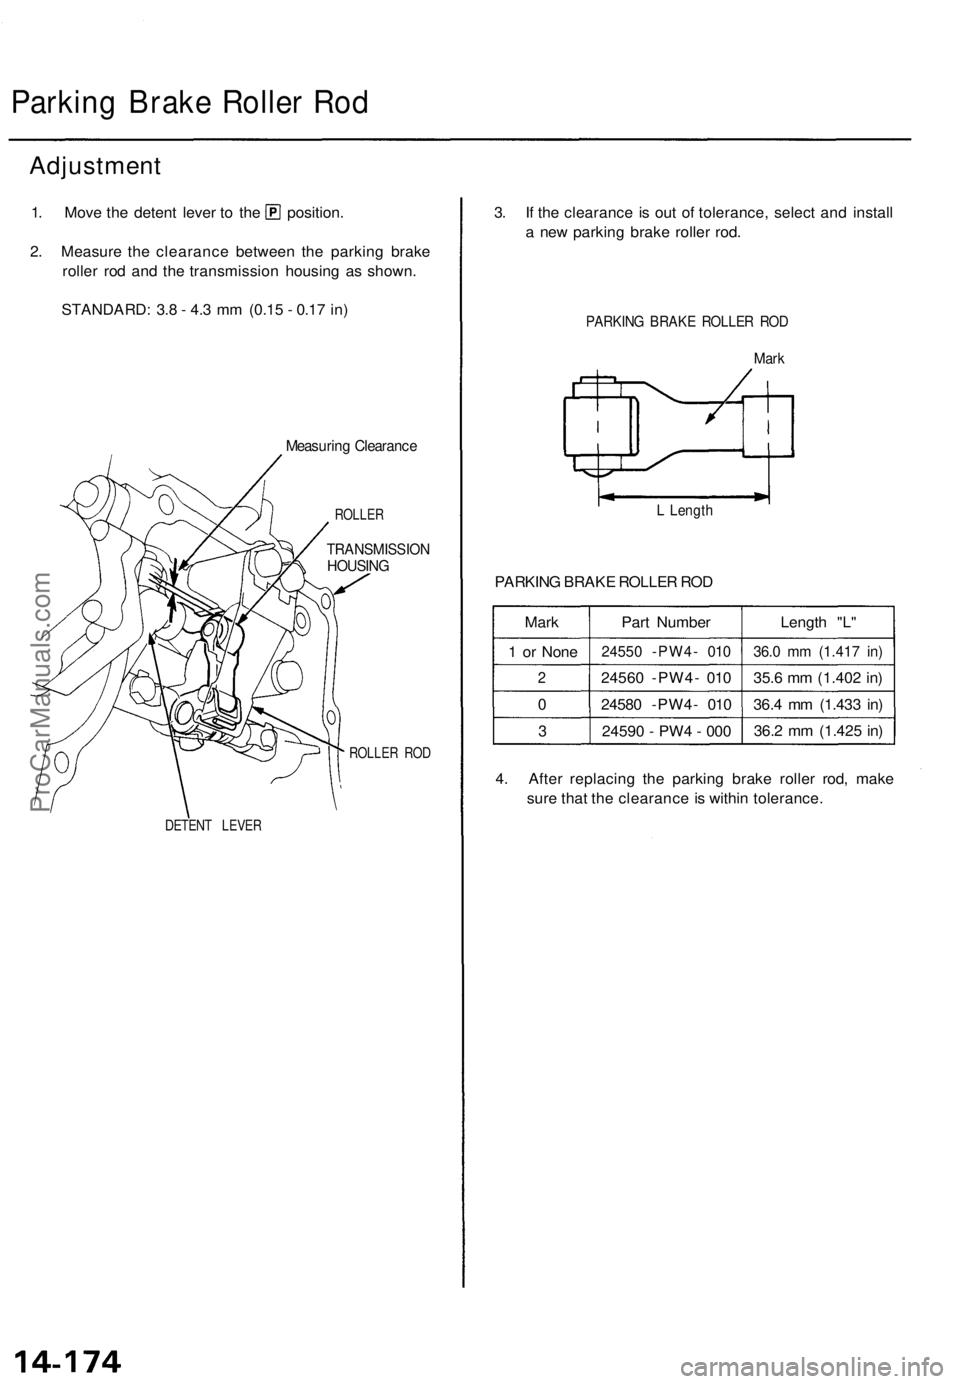 ACURA TL 1995  Service Repair Manual 
Parking Brake Roller Rod

Adjustment

1. Move the detent lever to the position.

2. Measure the clearance between the parking brake

roller rod and the transmission housing as shown.

STANDARD: 3.8 -